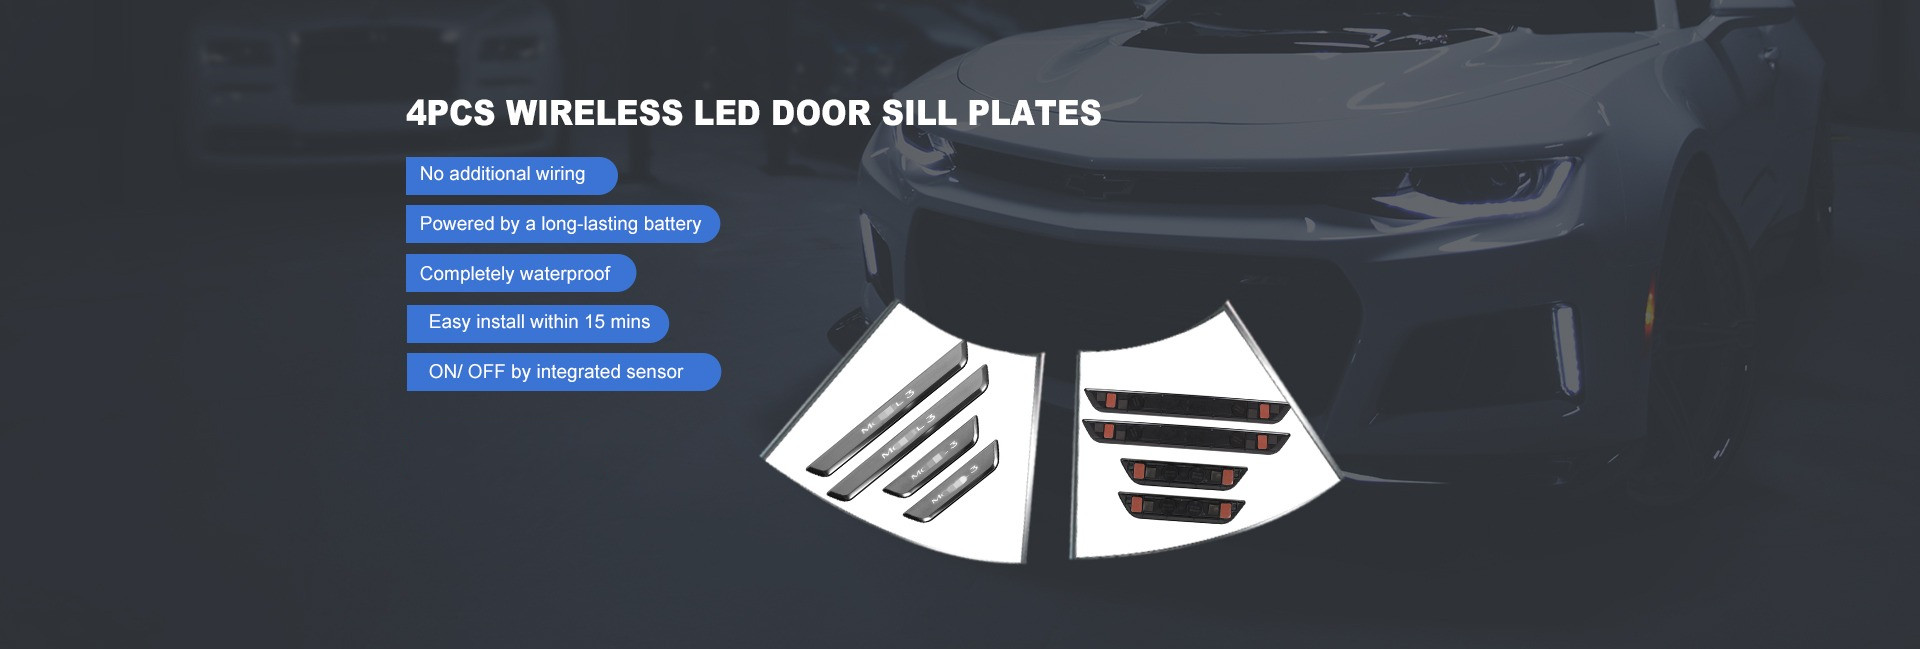 4pcs wireless led door sill plates, powered with battery